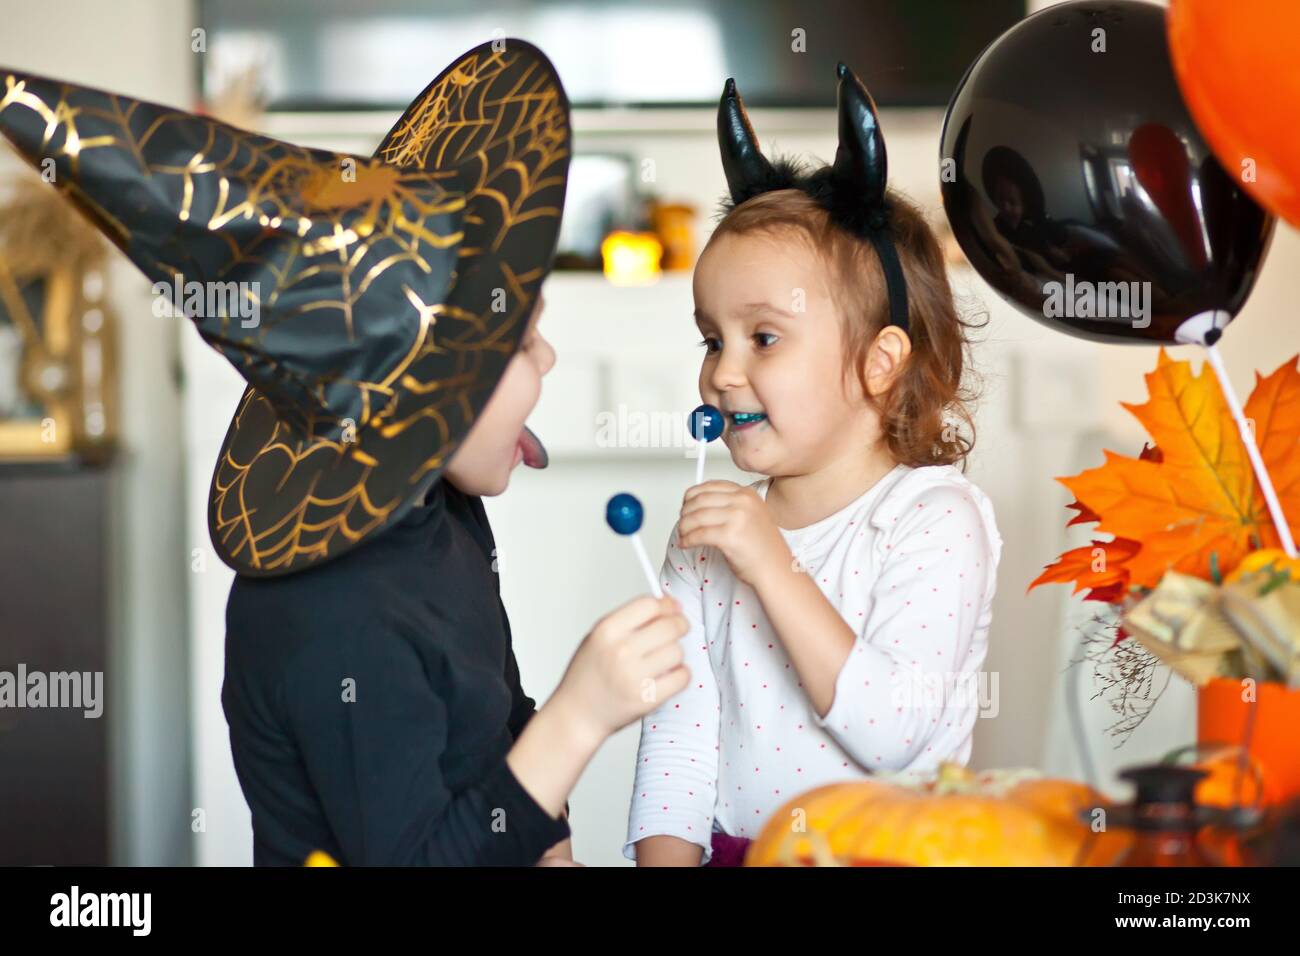 funny child girl and boy in witch and evil costumes for Halloween eating candies lolly pops and have fun. Stock Photo